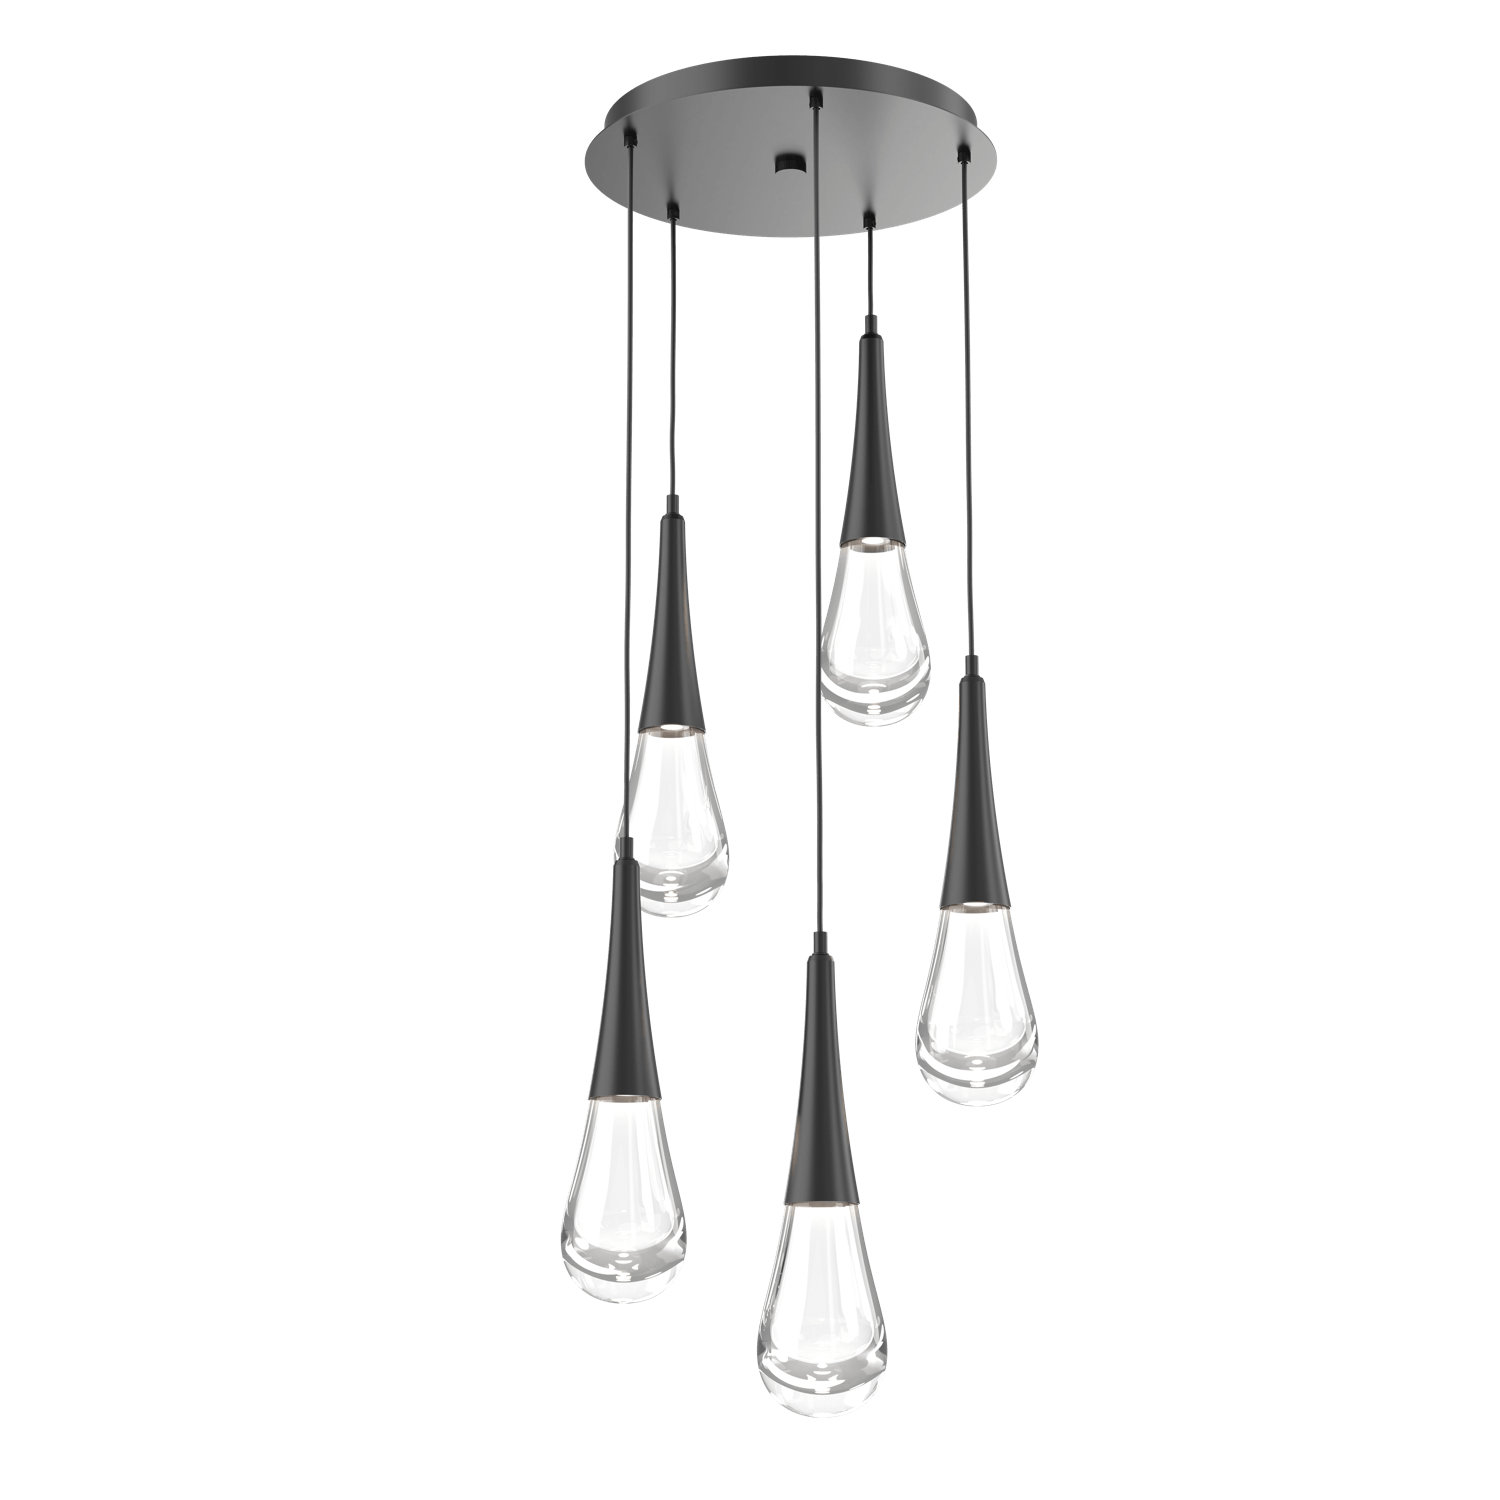 CHB0078-05-MB-Hammerton-Studio-Raindrop-5-light-round-pendant-chandelier-with-matte-black-finish-and-clear-blown-glass-shades-and-LED-lamping